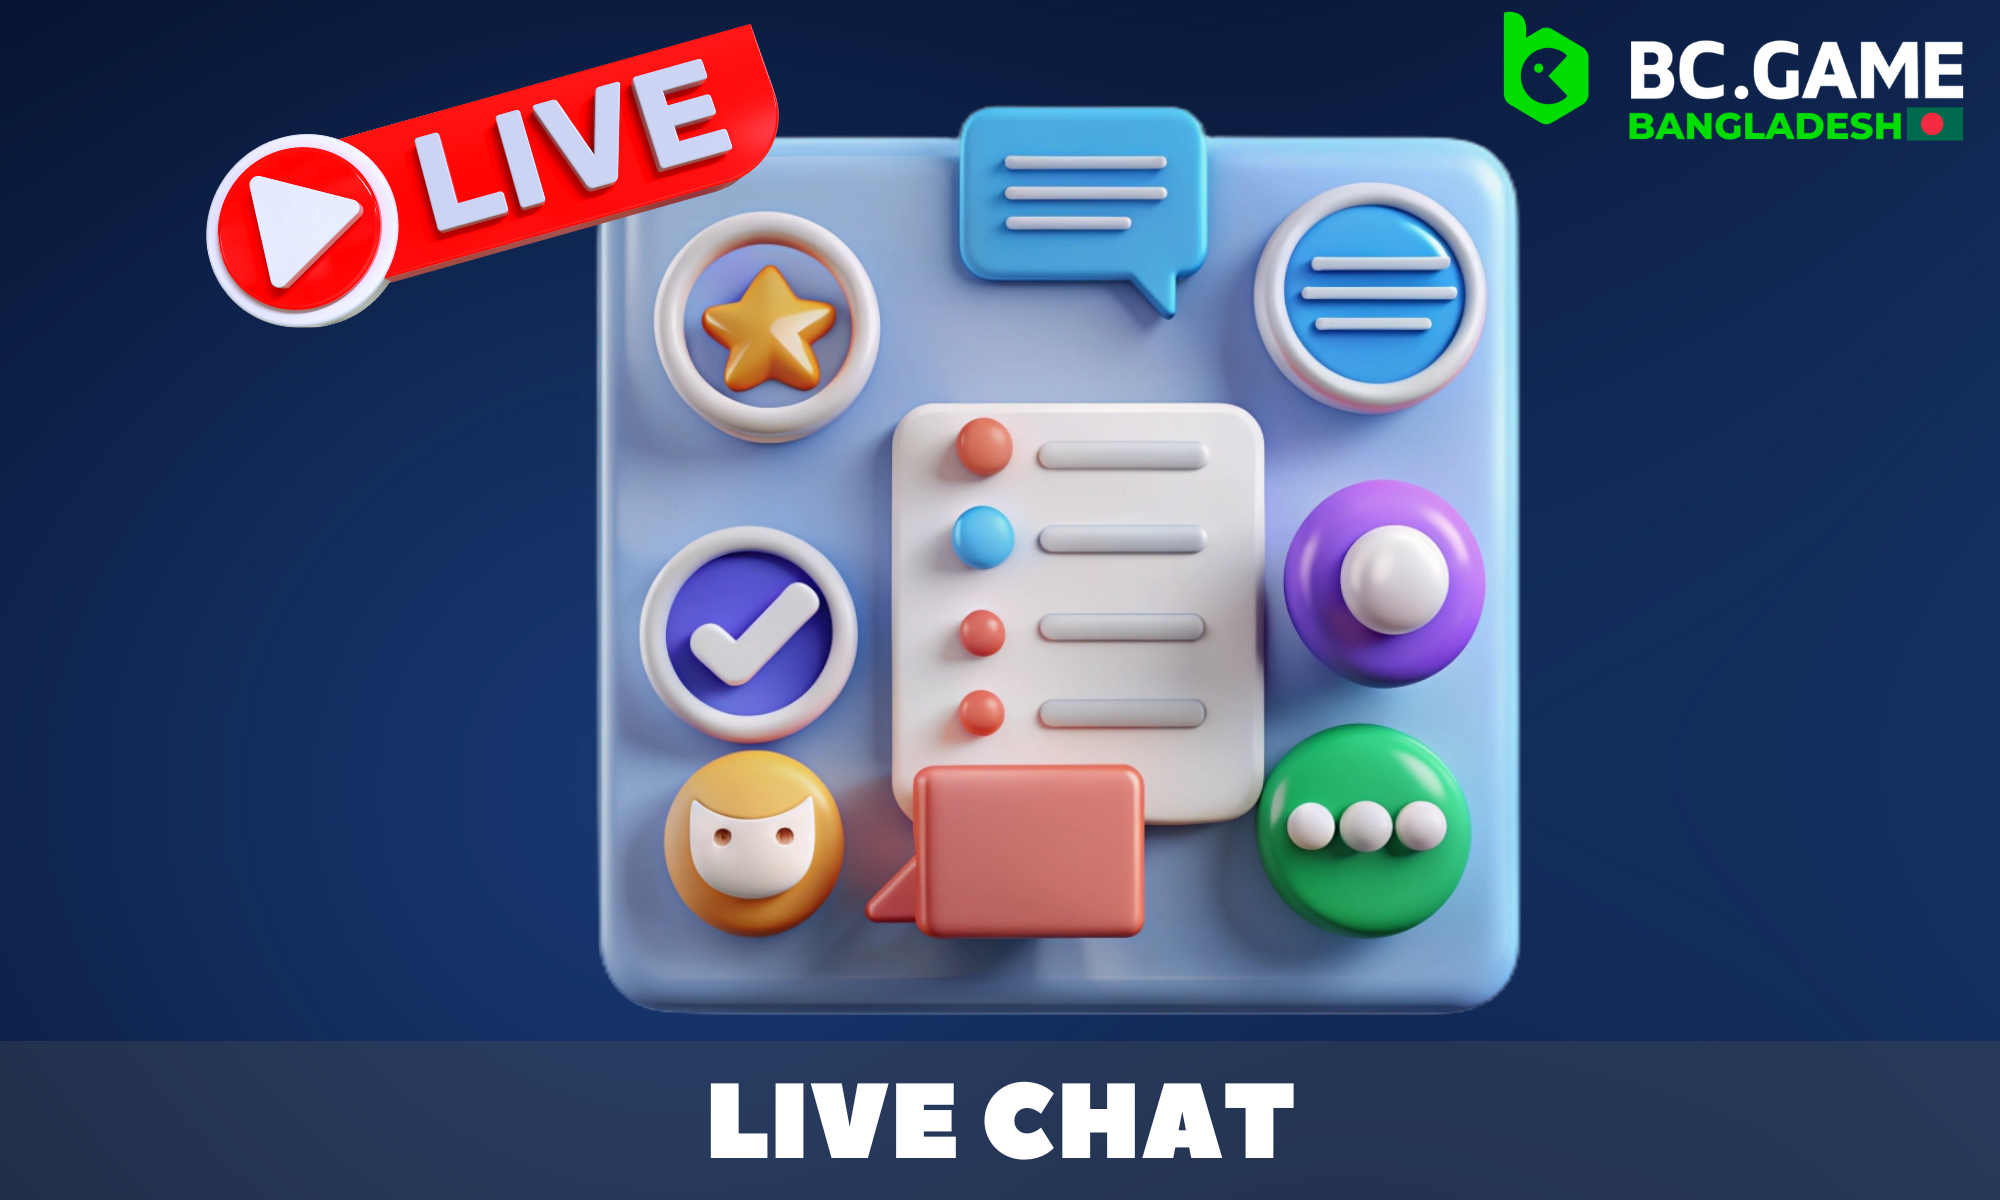 BC.GAME Bangladesh has a convenient and fast live chat to resolve any issues